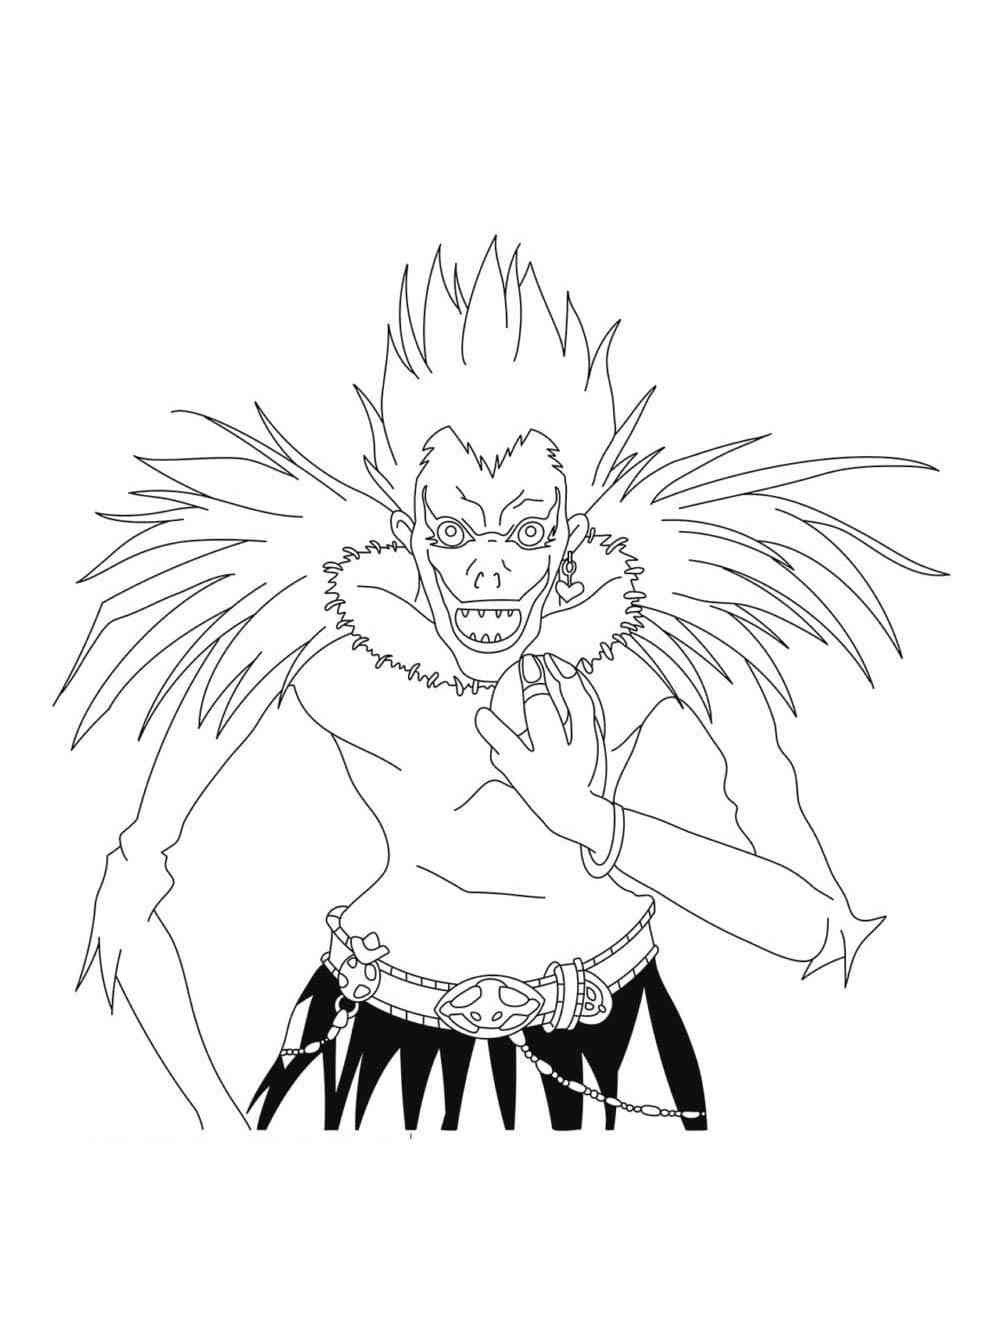 Ryuk from Death Note coloring page